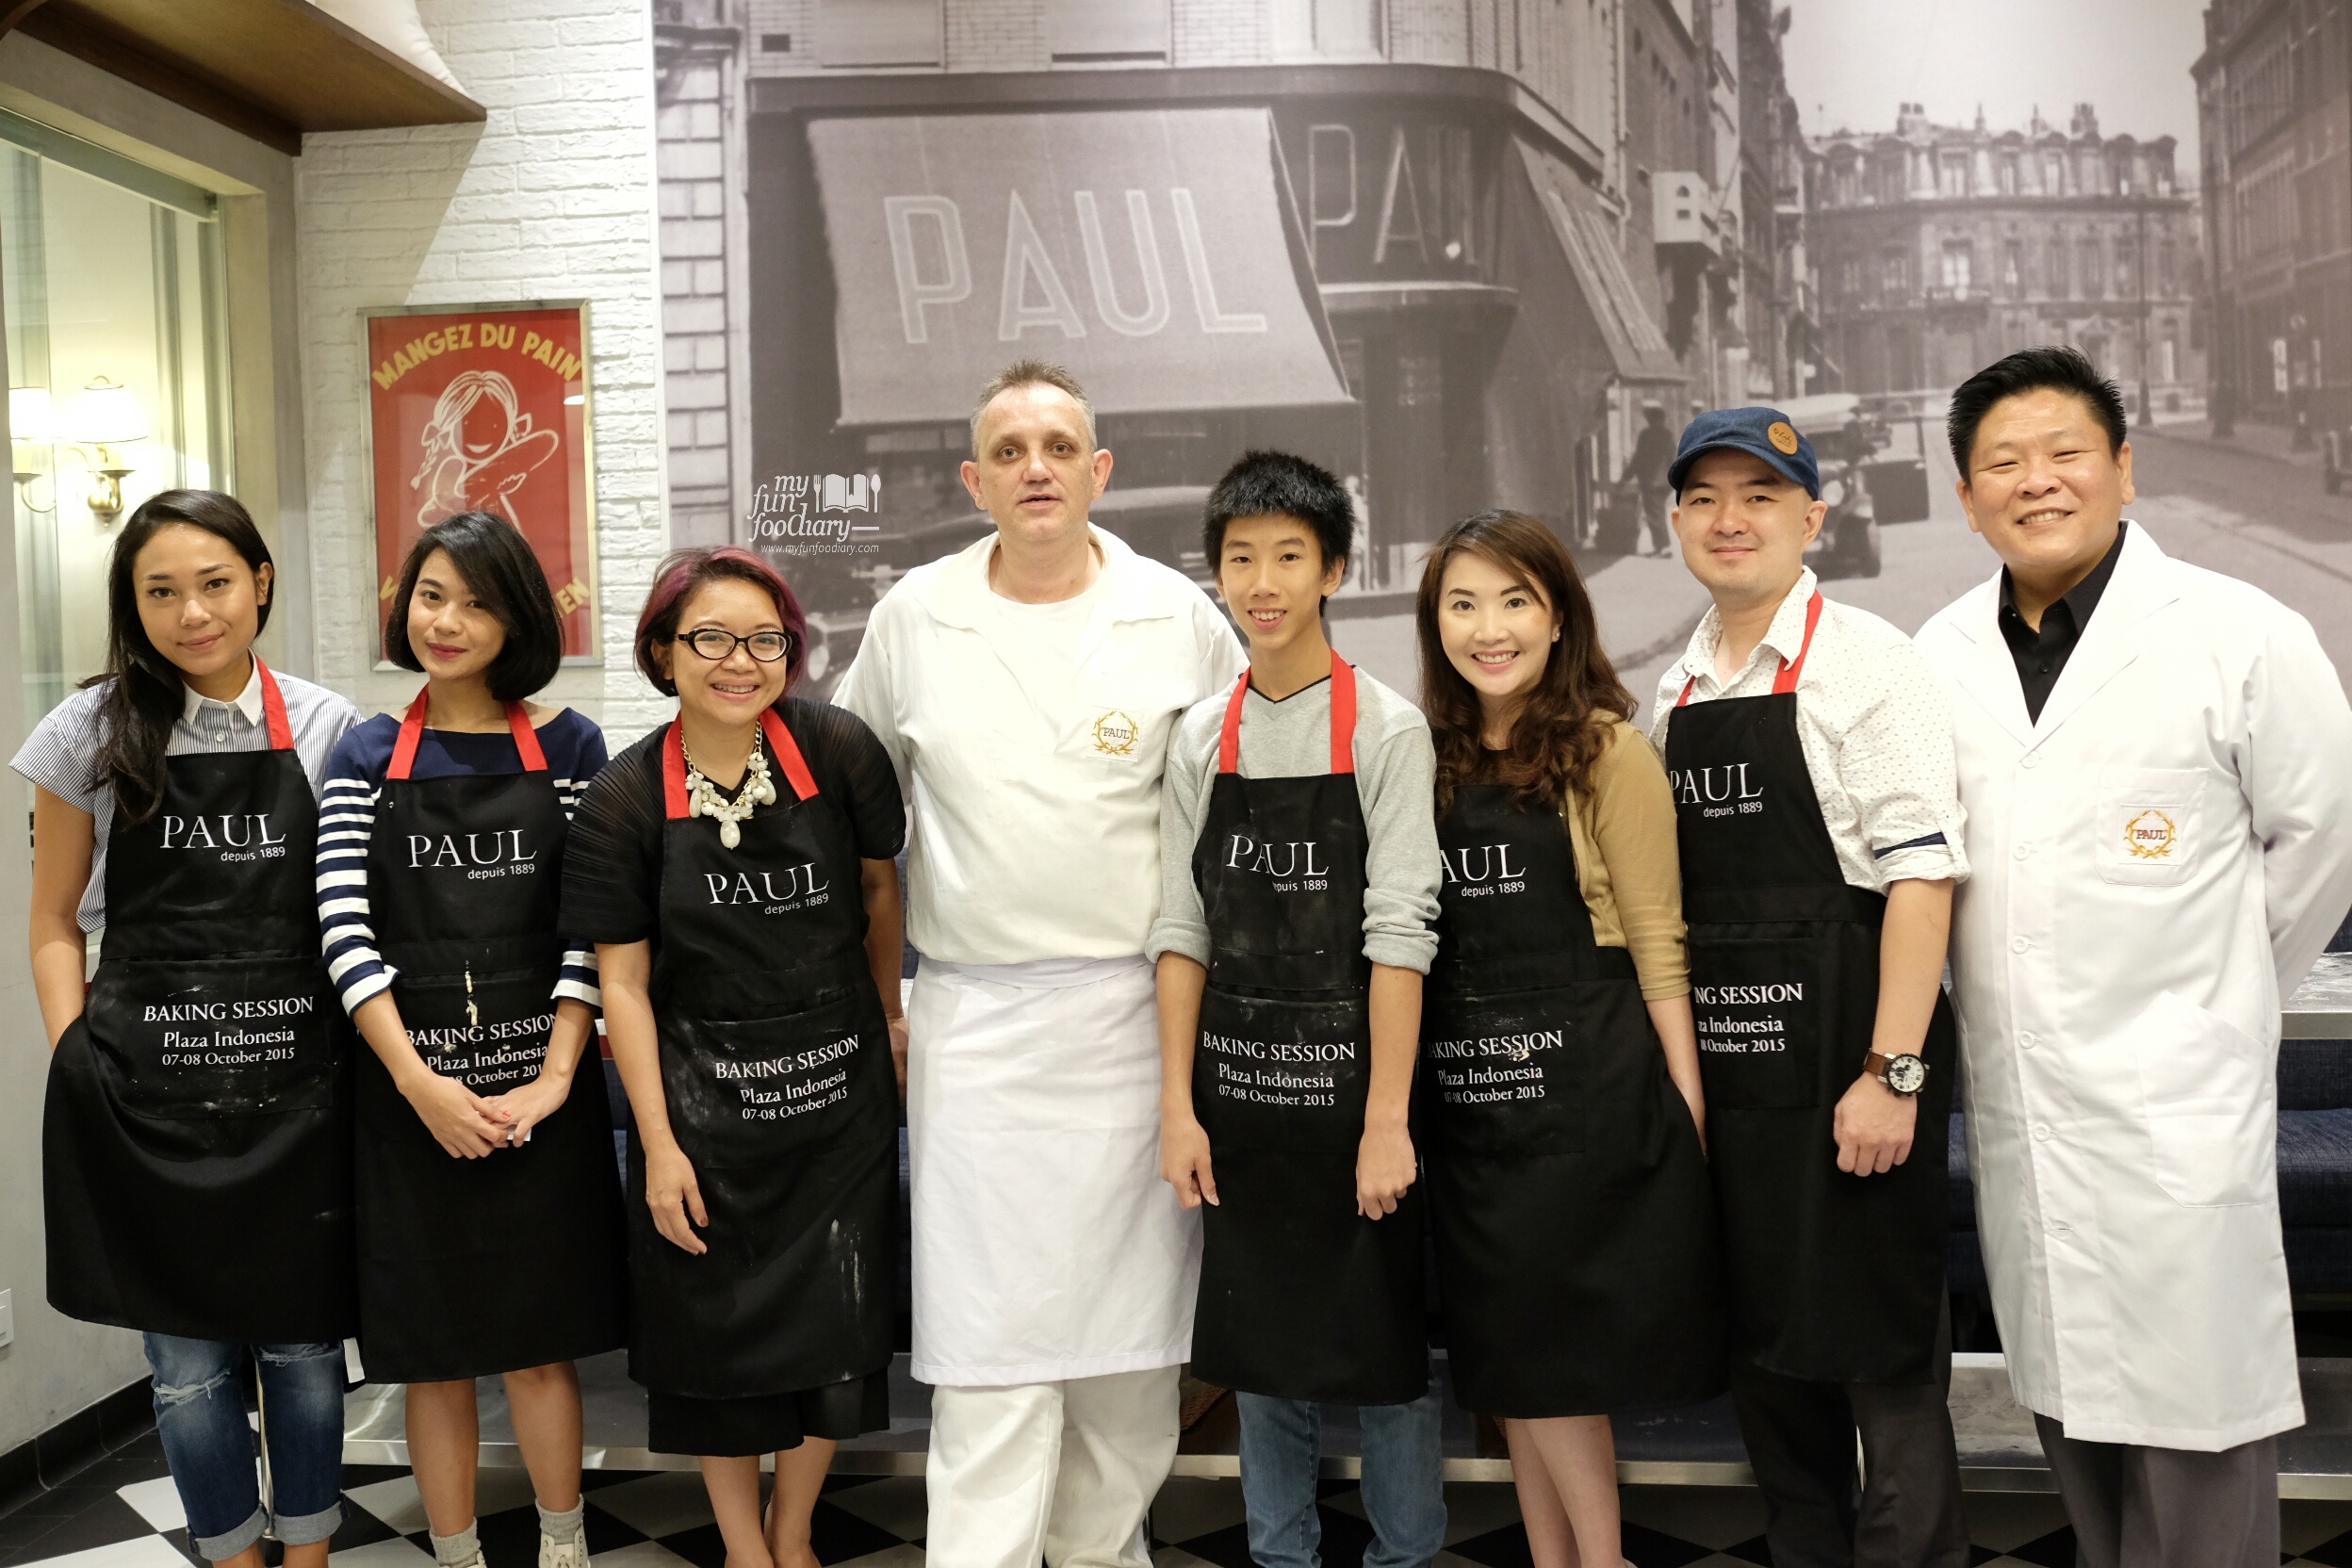 All the Baking Class participants at Paul Indonesia by Myfunfoodiary